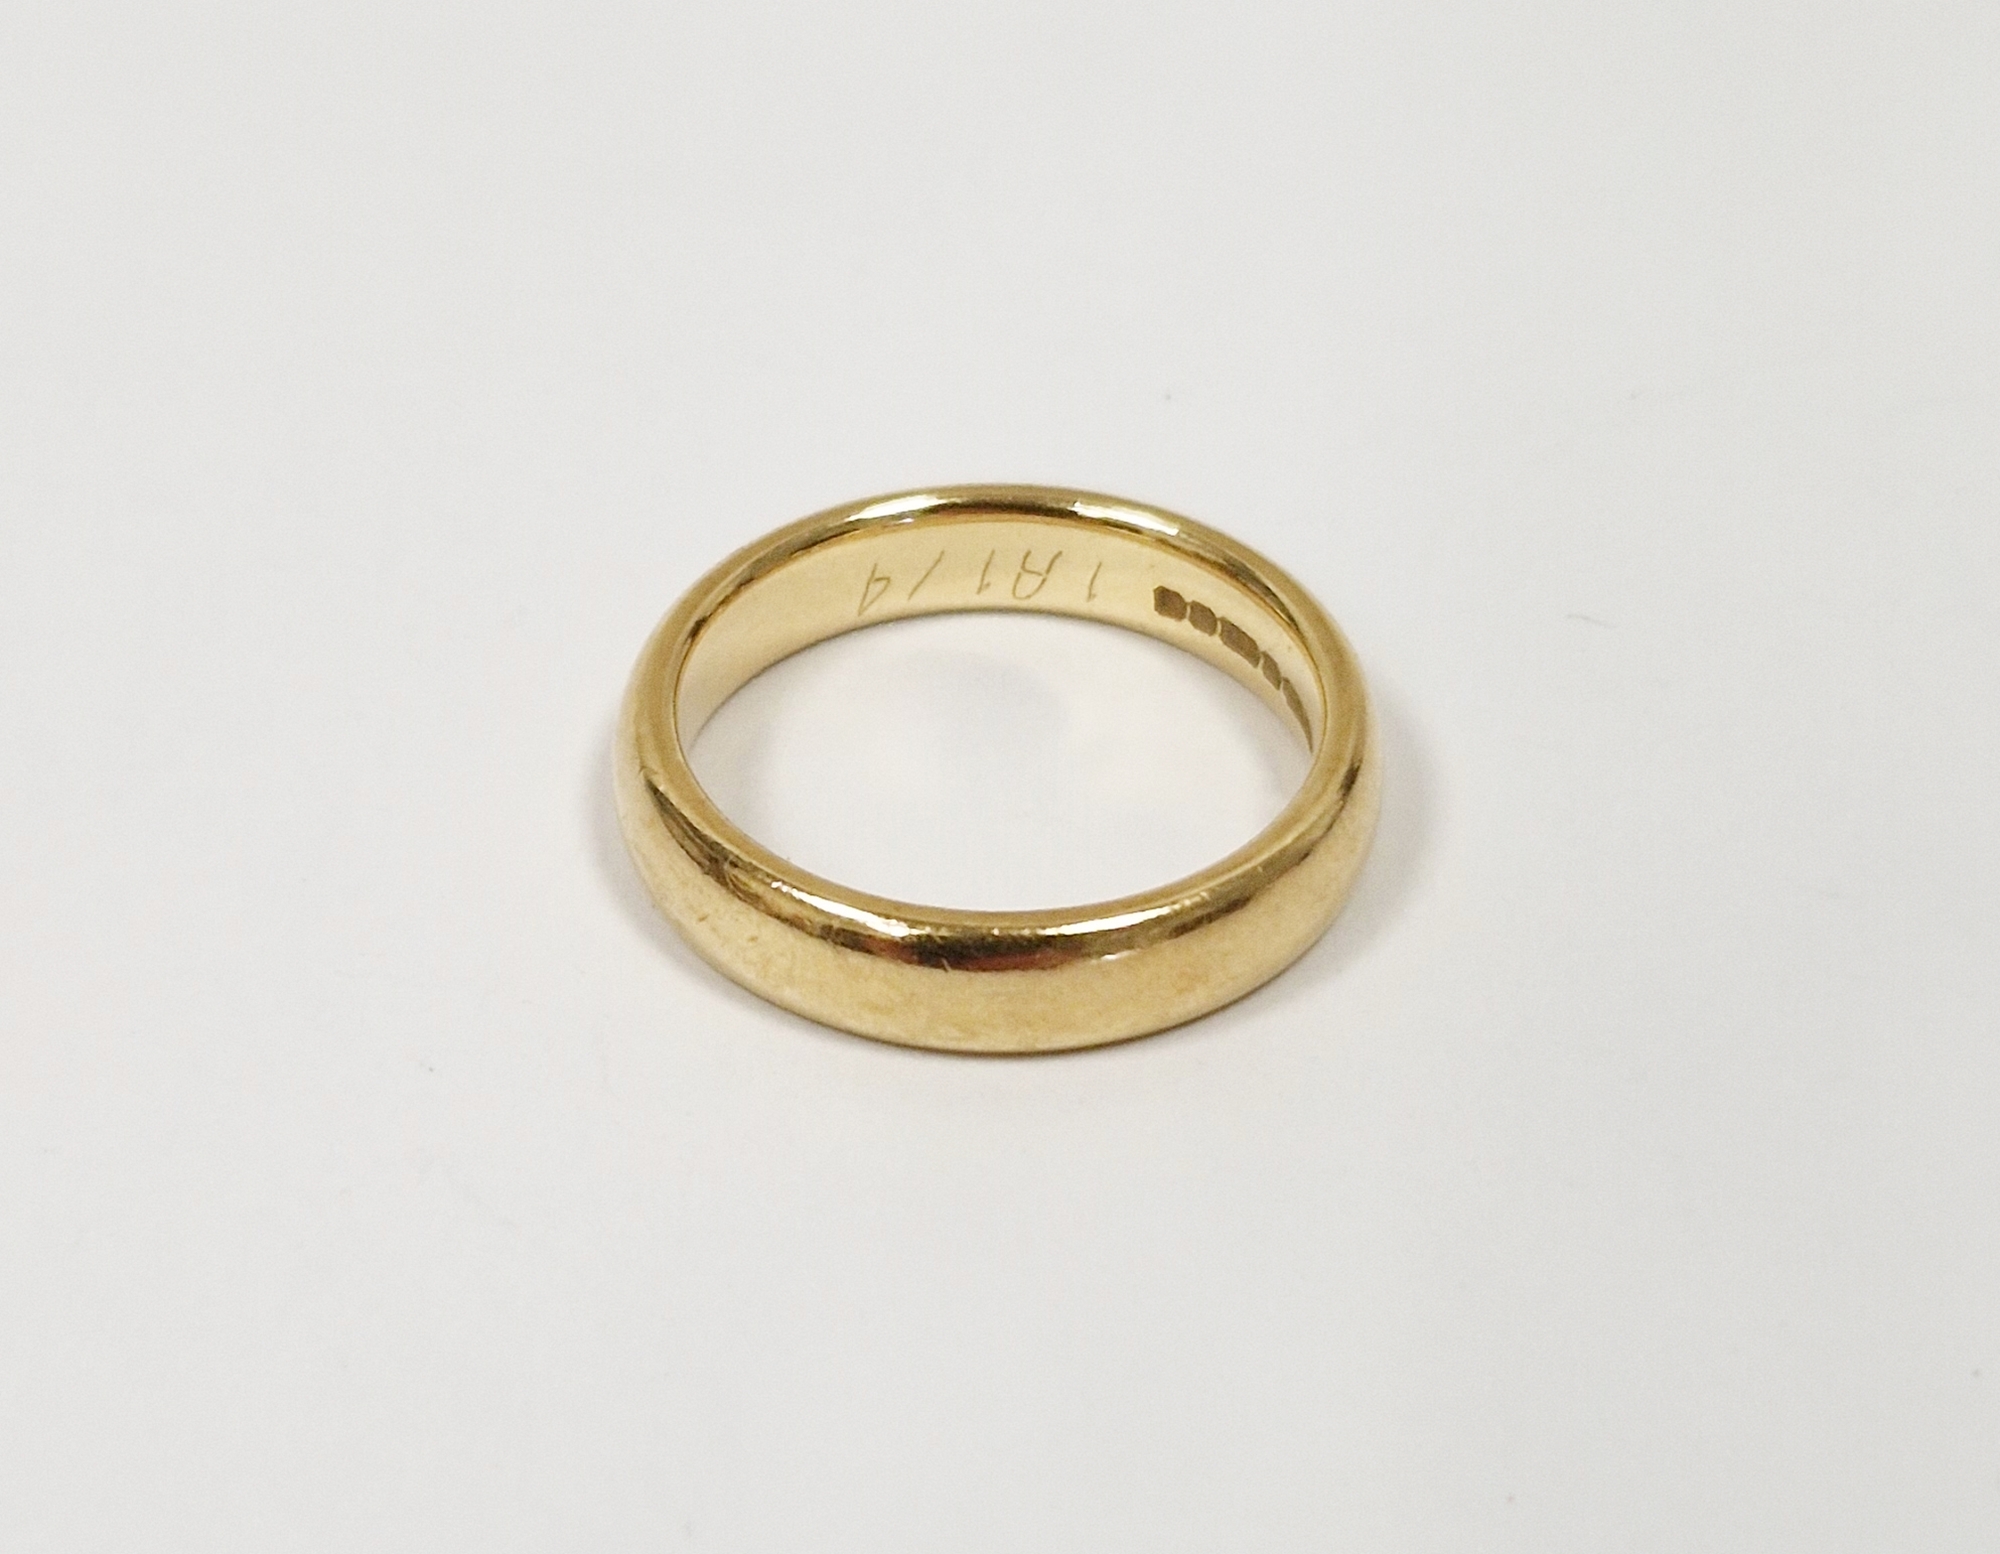 18ct gold wedding band, 5g approx., size K